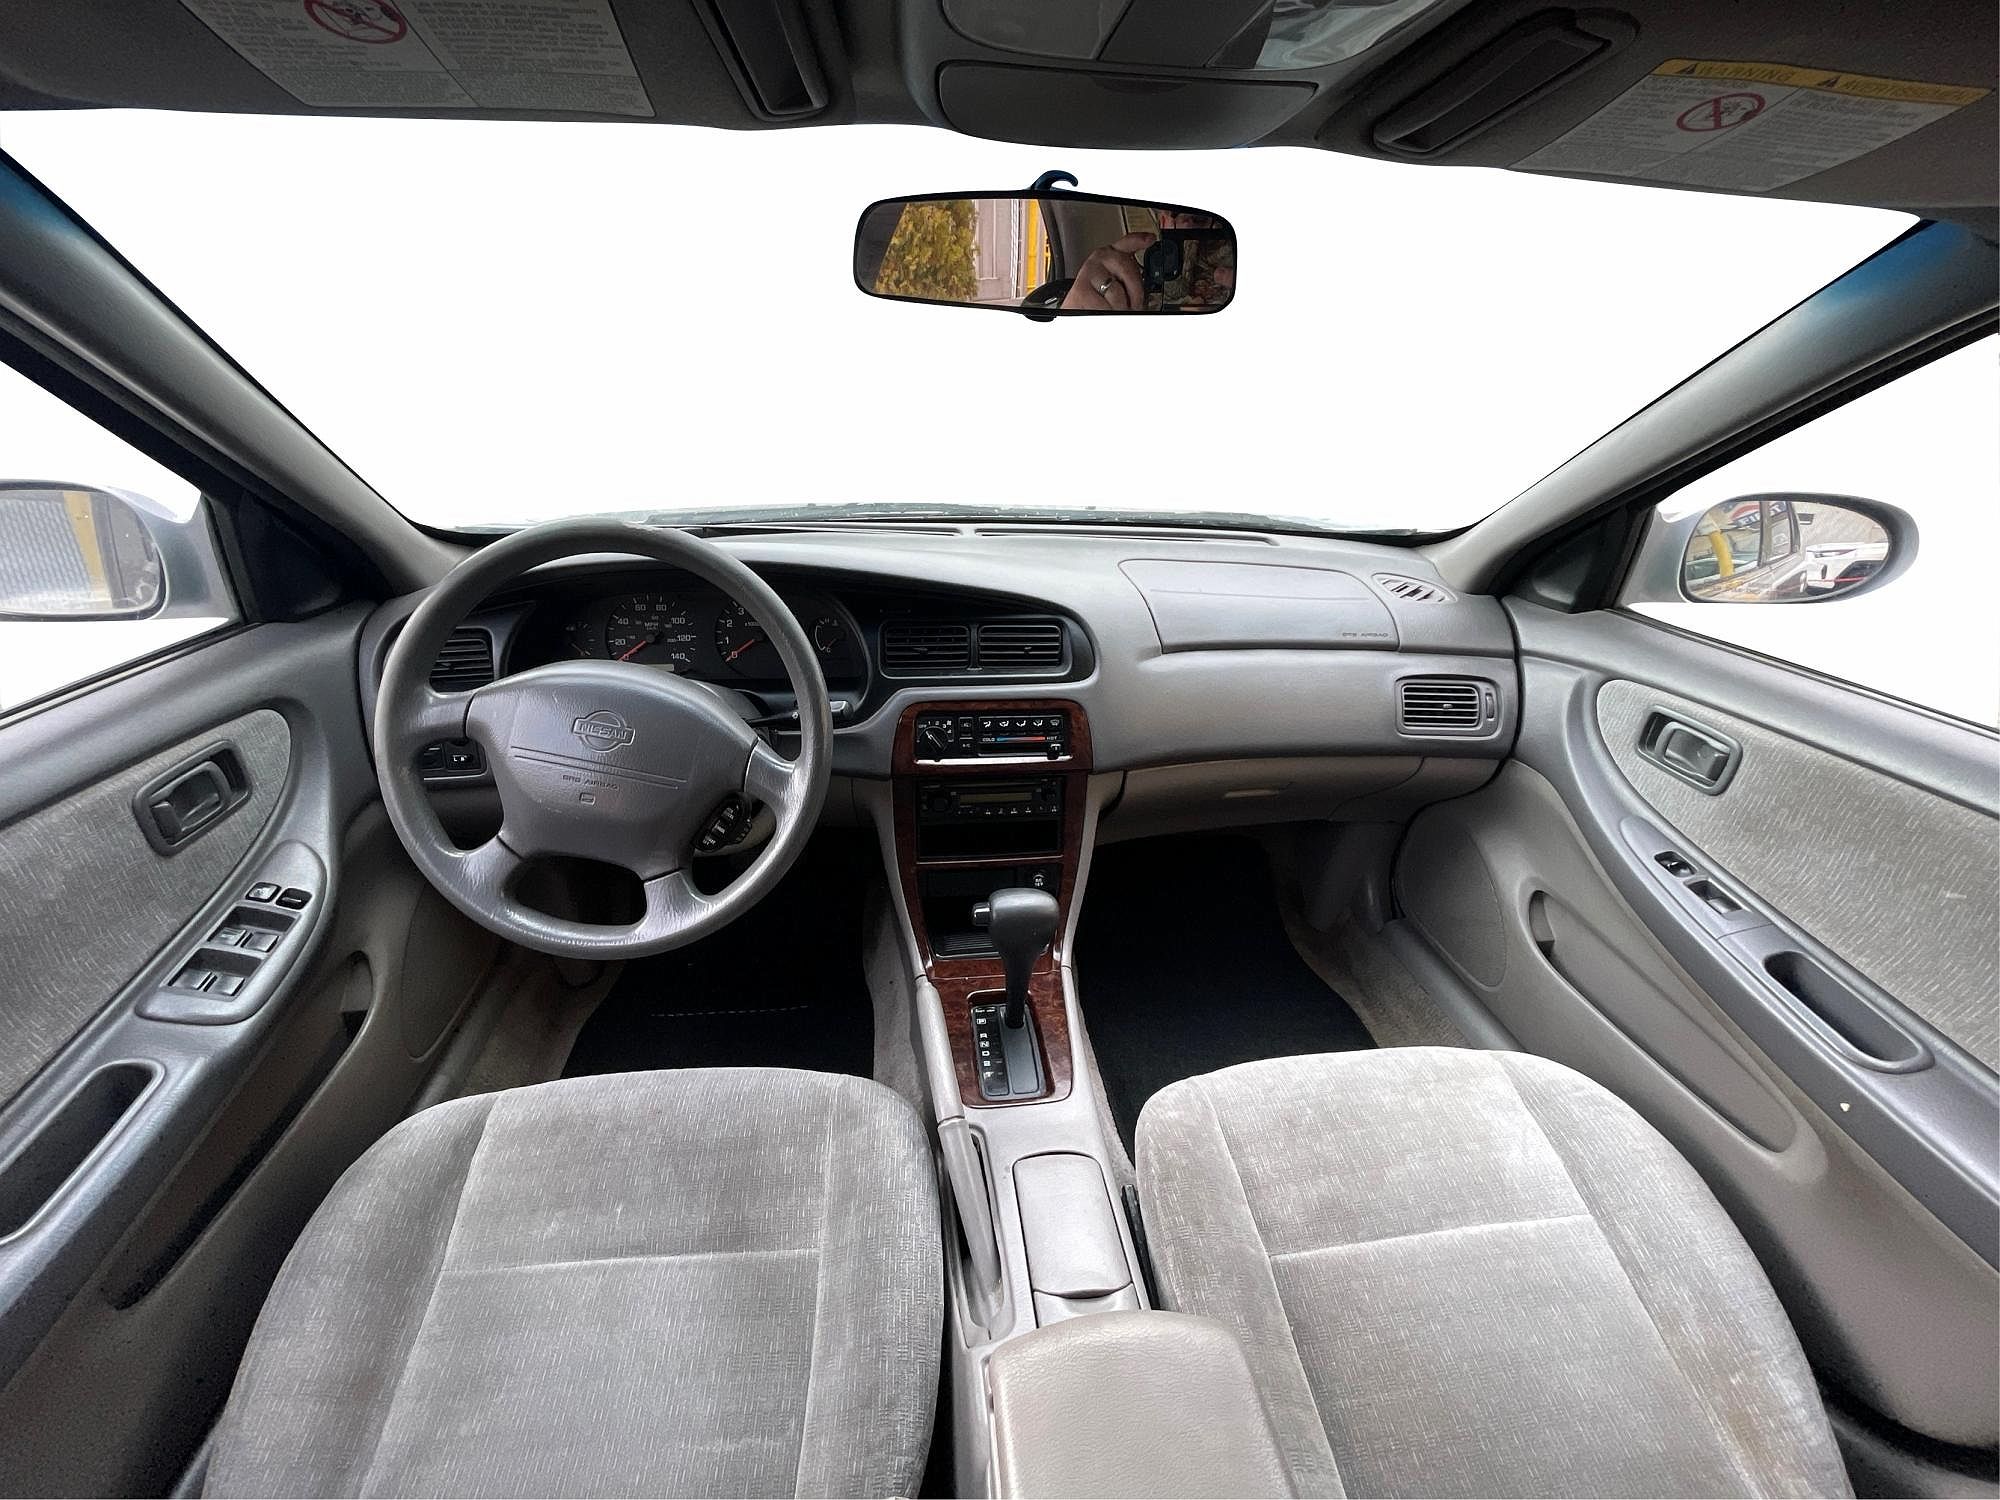 2001 Nissan Altima GXE image 20